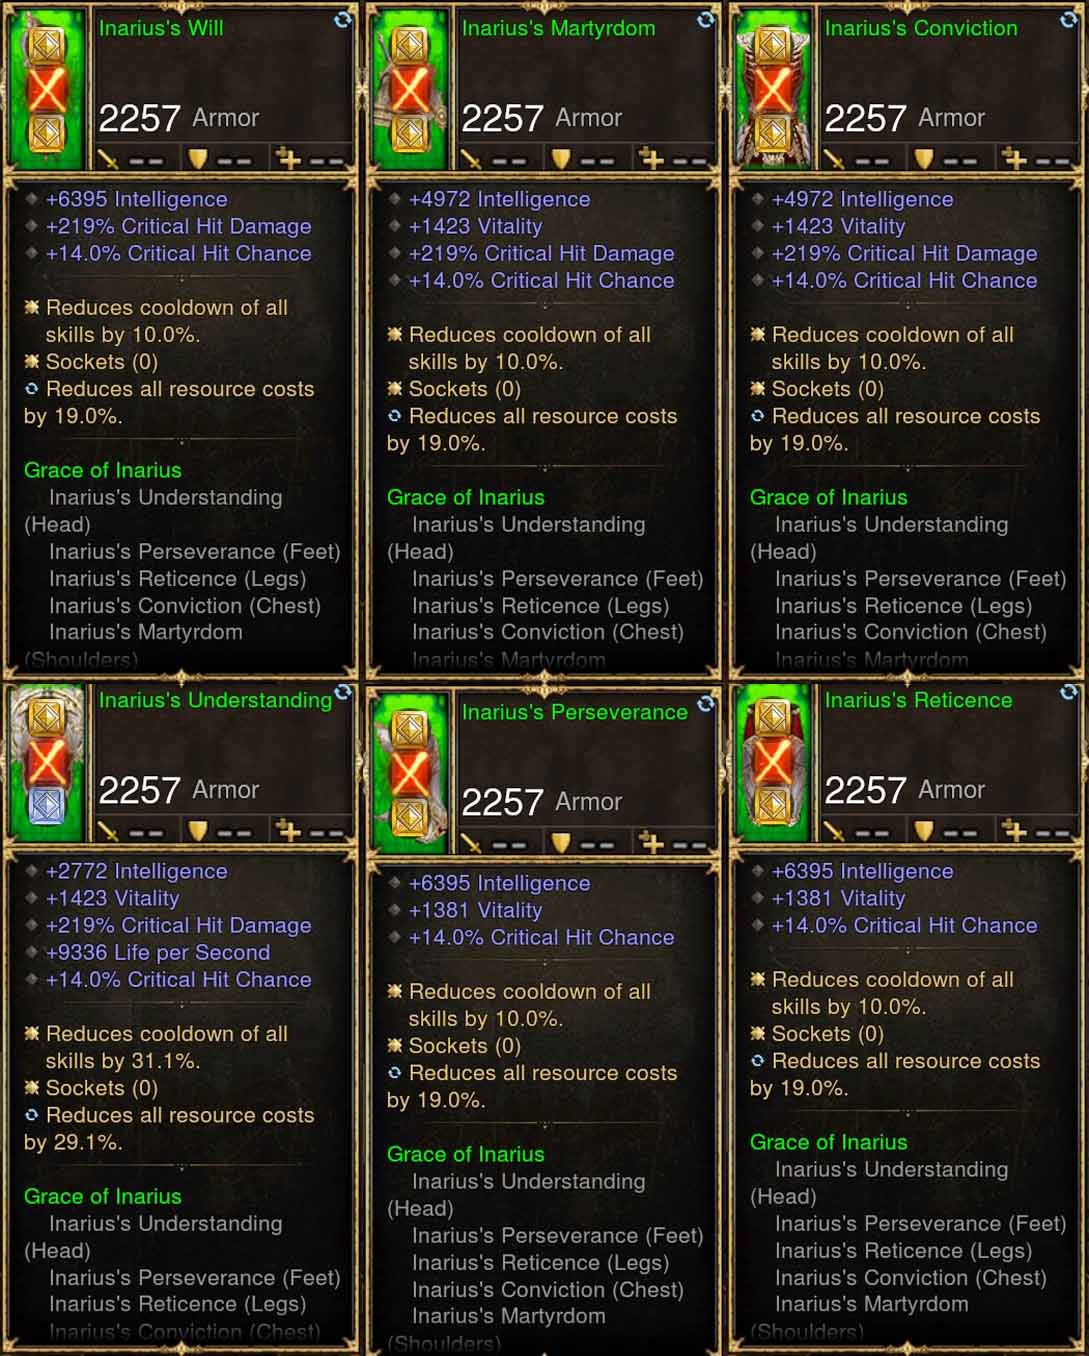 6x Piece Inarius Necromancer Set Diablo 3 Mods ROS Seasonal and Non Seasonal Save Mod - Modded Items and Gear - Hacks - Cheats - Trainers for Playstation 4 - Playstation 5 - Nintendo Switch - Xbox One